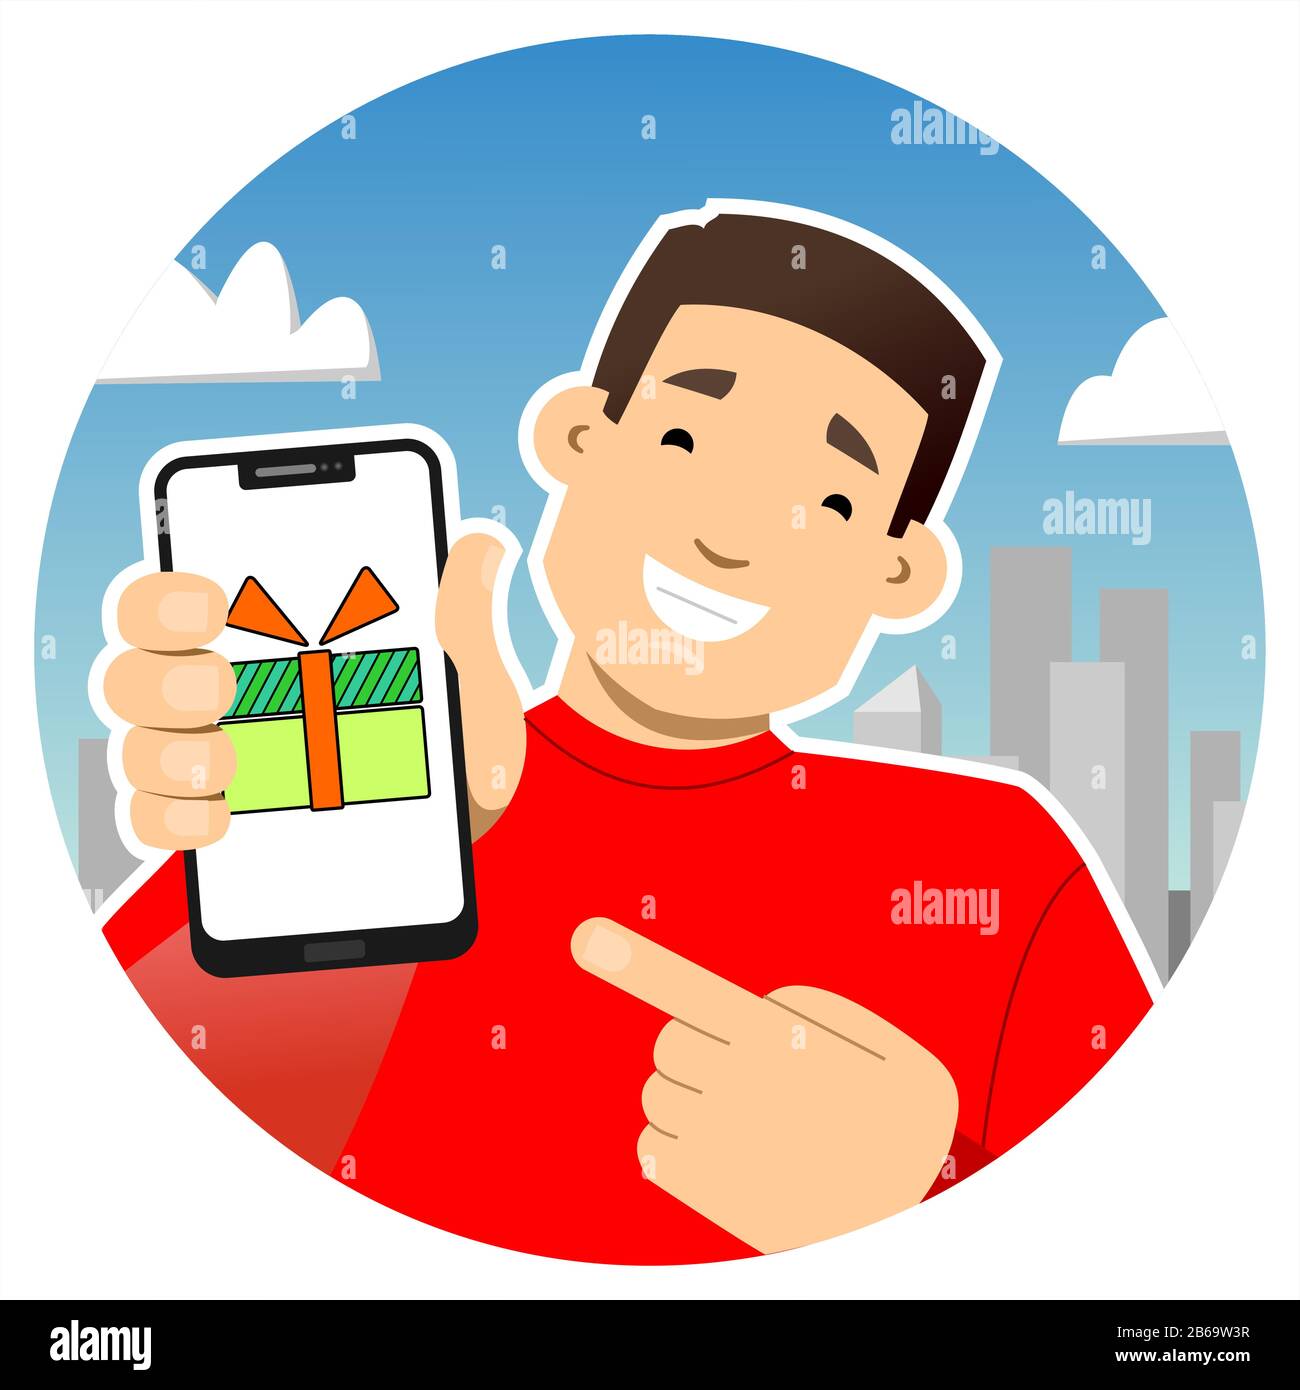 Smiling guy with a phone. Shows the phone screen, points to it with a finger. Gift, gift box with a bow on the screen. Round icon. Stock Vector